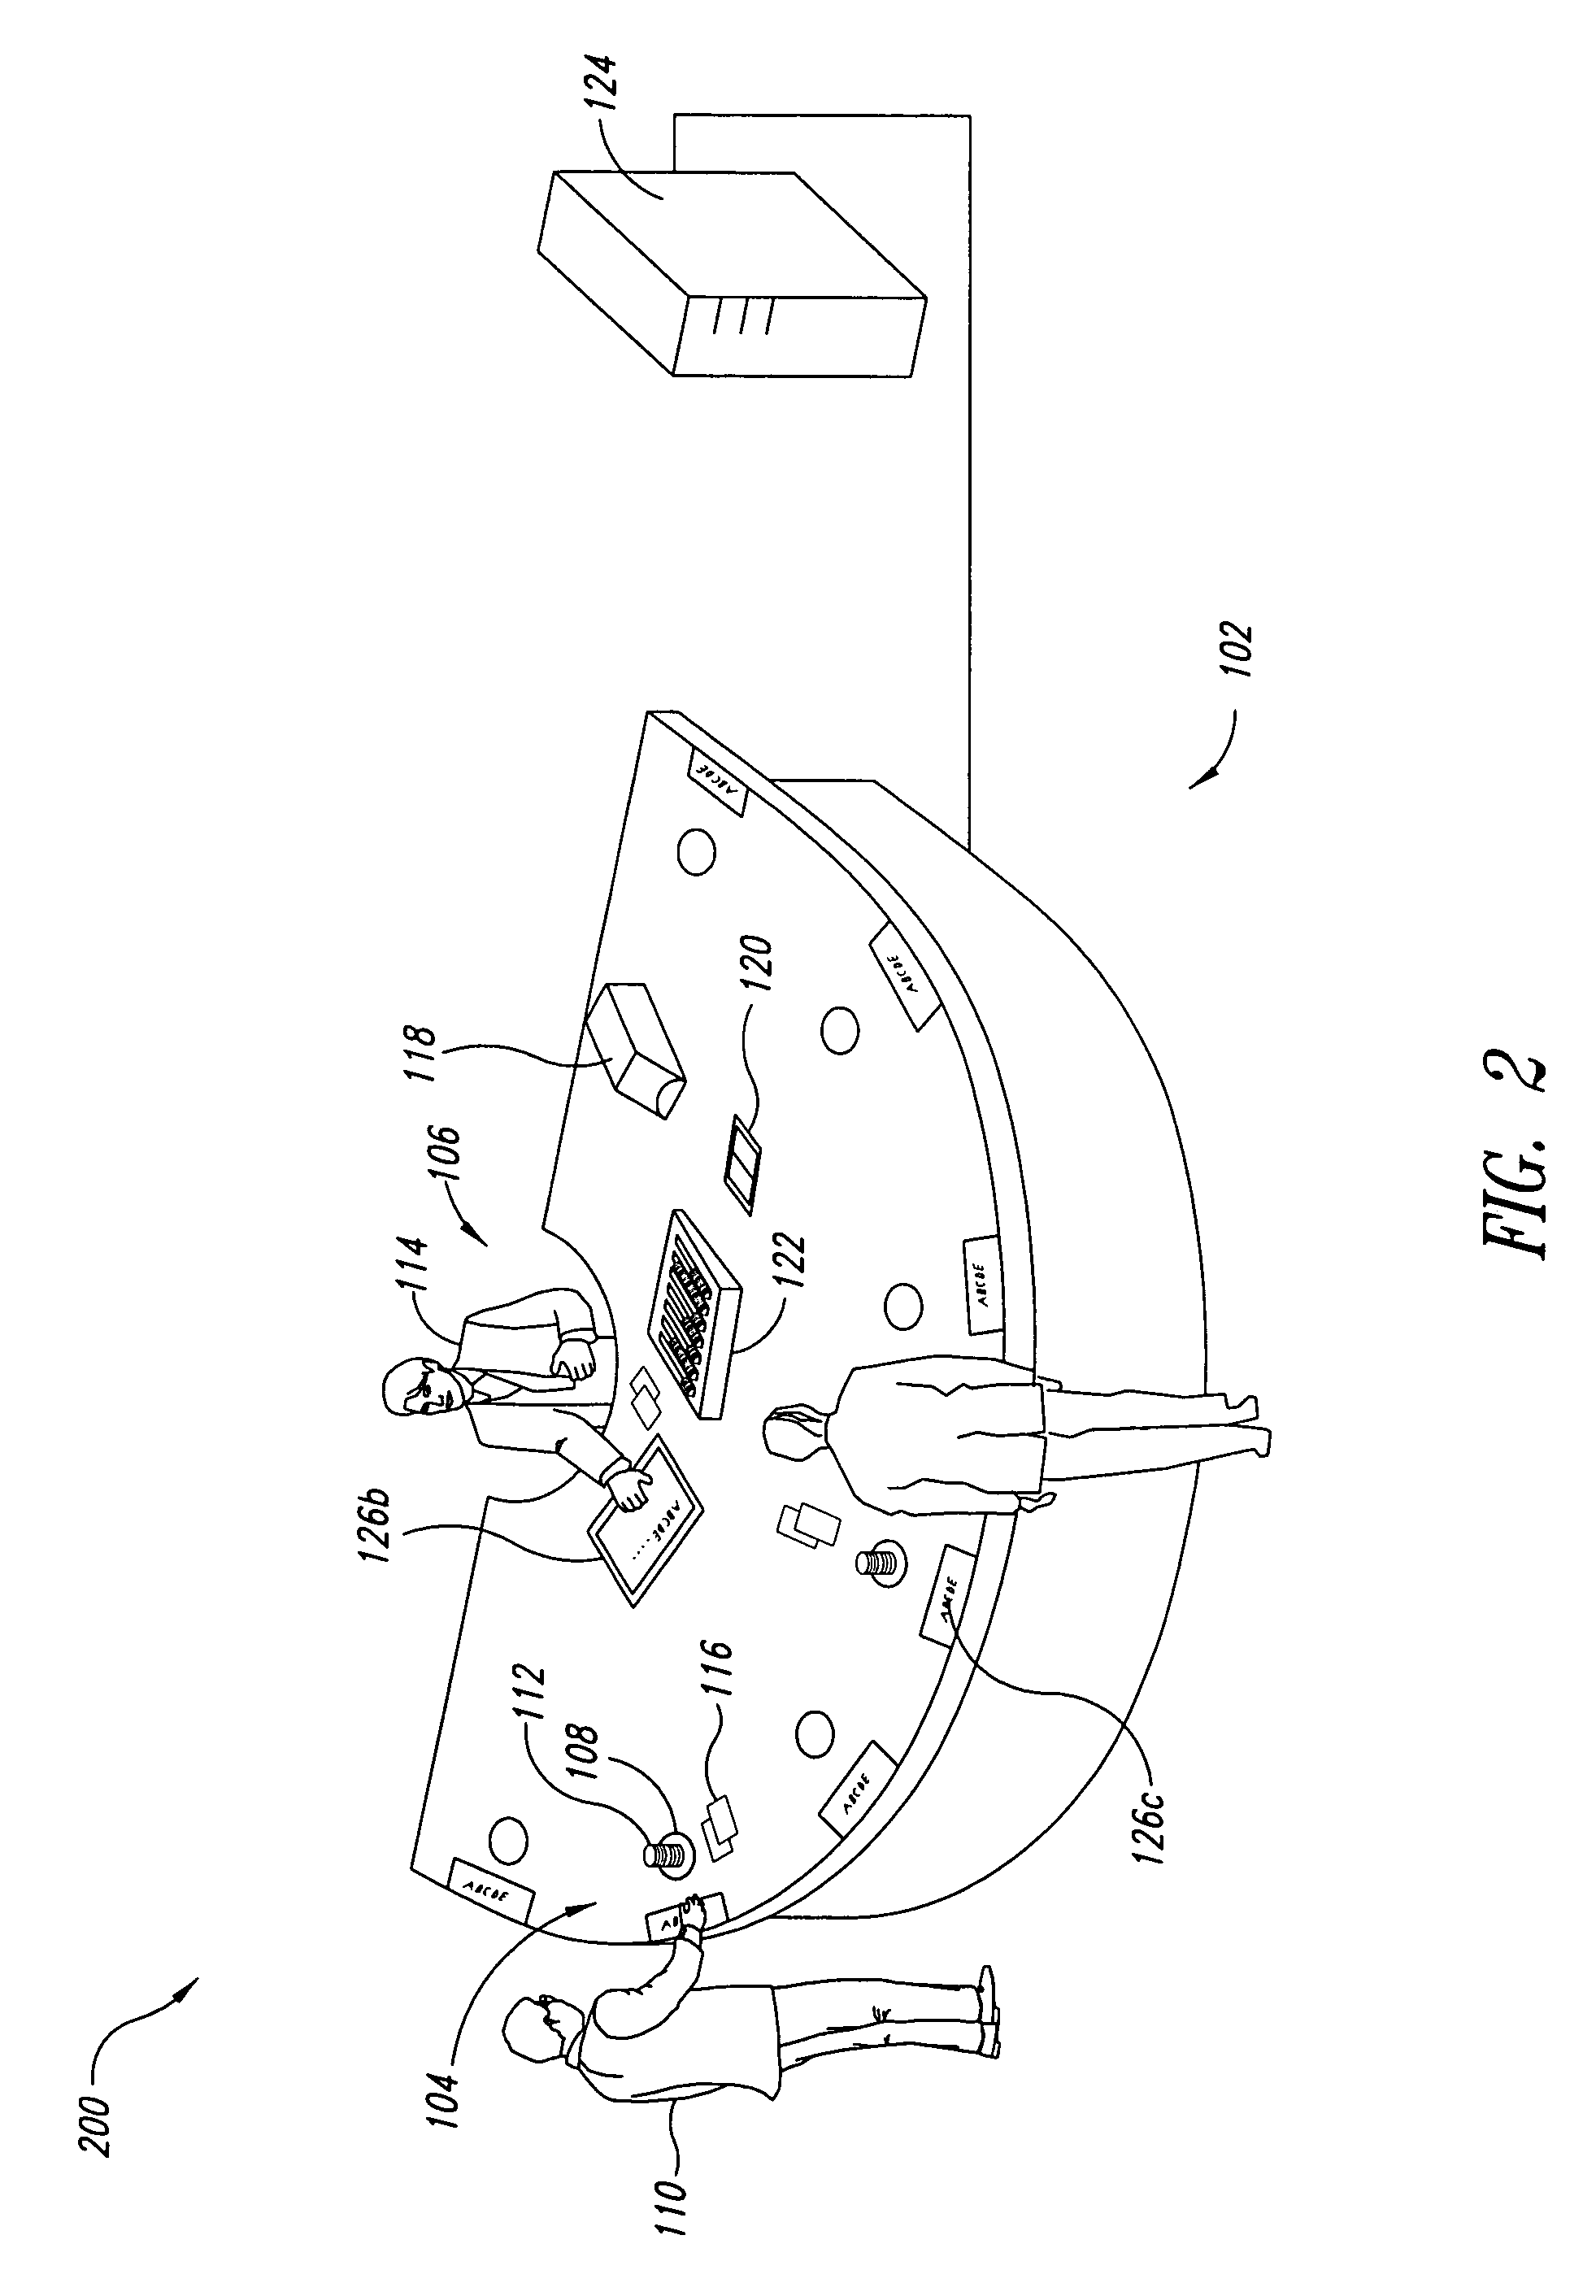 Systems, methods and articles to facilitate playing card games with intermediary playing card receiver